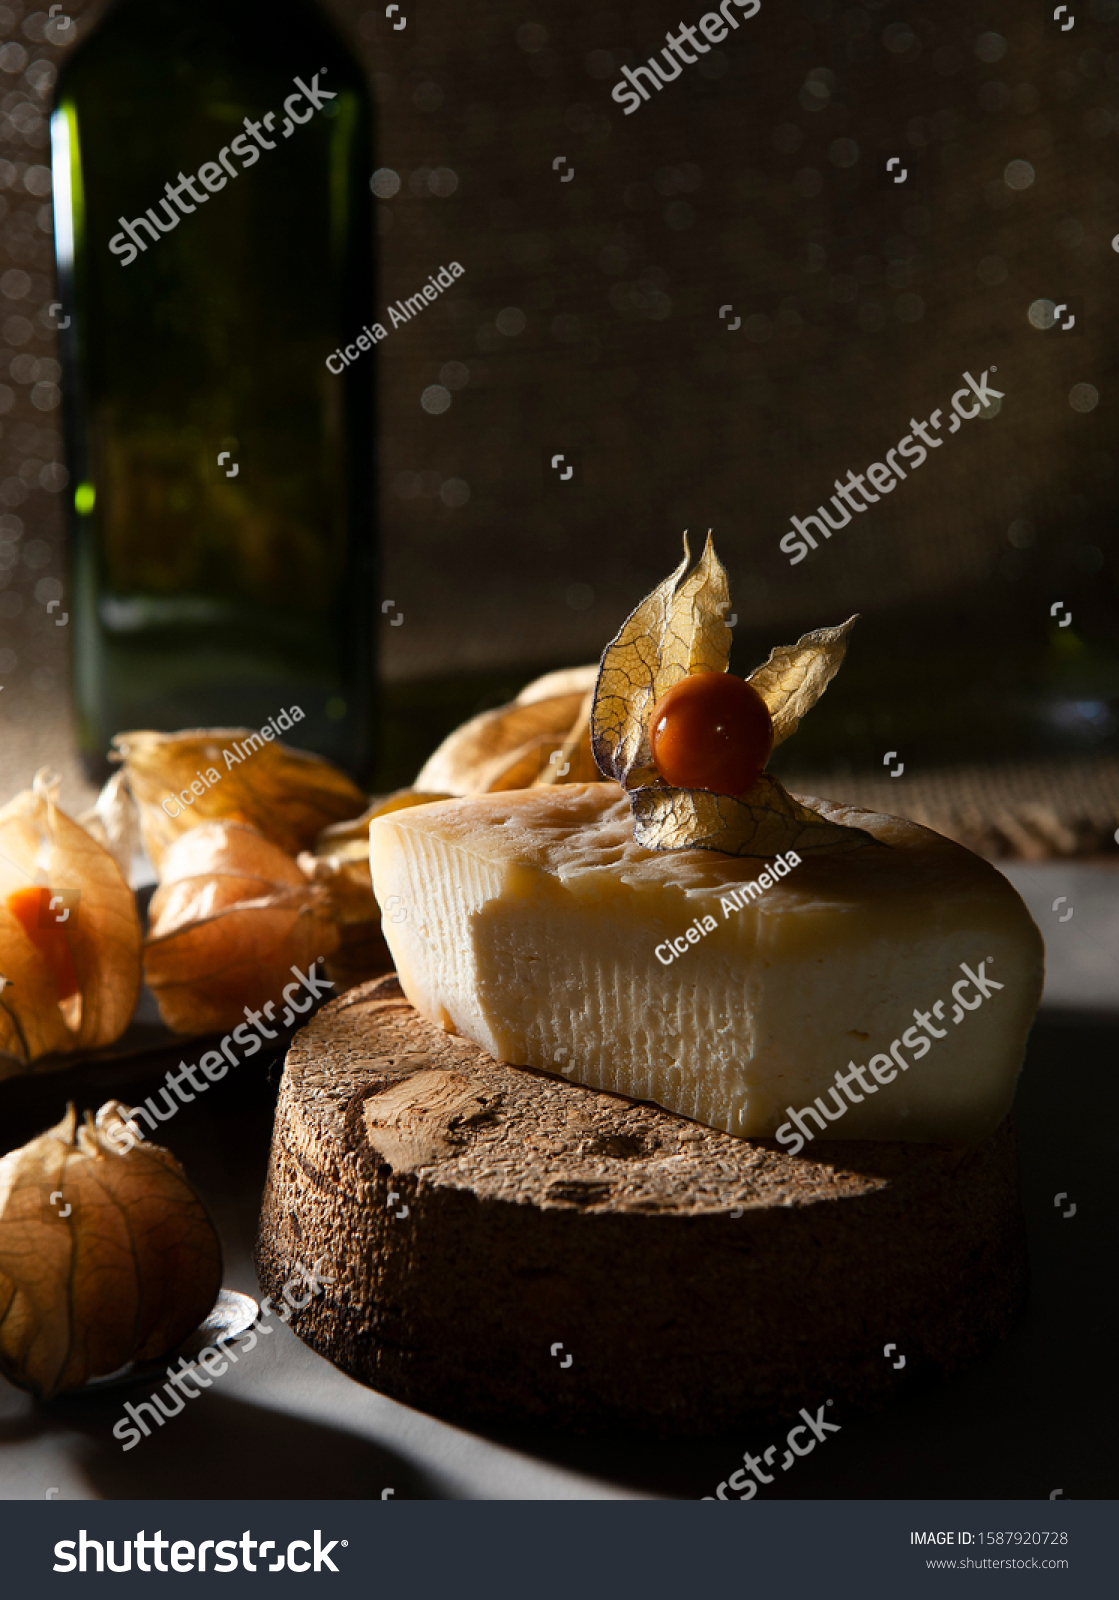 Half ripened cheese from Minas Gerais. Selective focus. Brazilian Christmas table .Exotic fruit, physalis, focused .Focused white lights background. Seen up close. Vertical. #1587920728